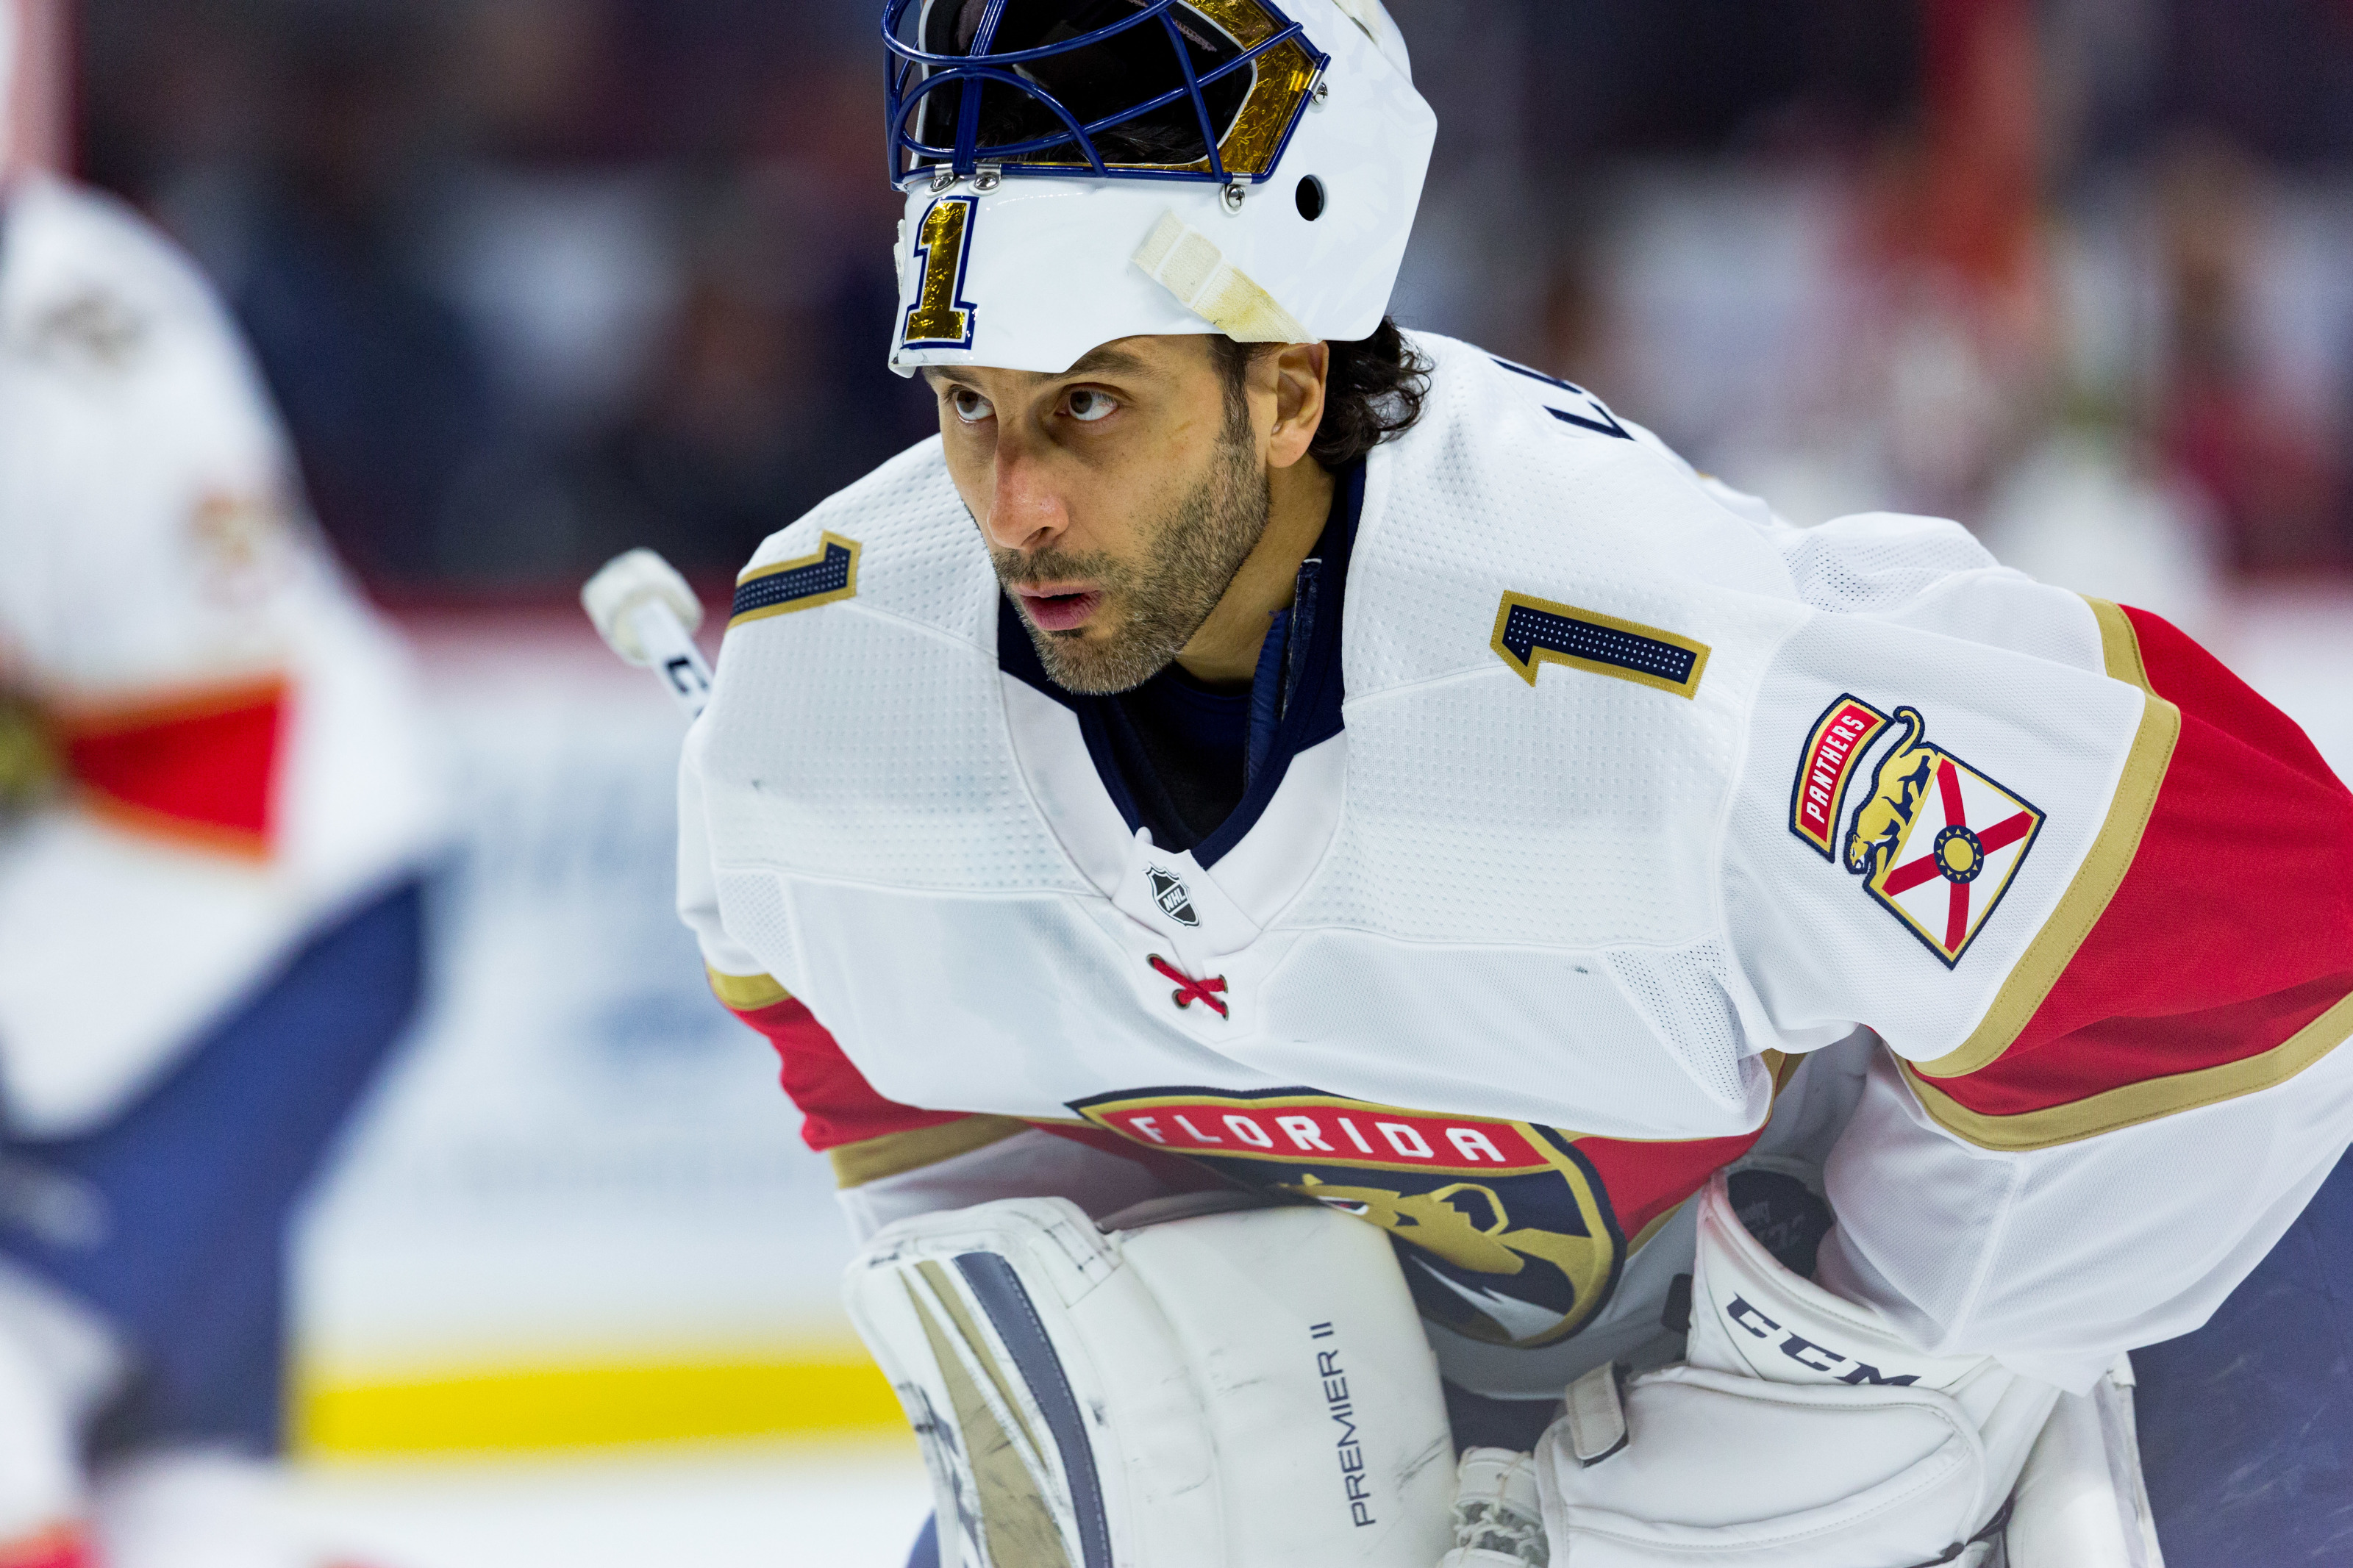 Roberto Luongo to become first Florida Panthers player to have his number  retired